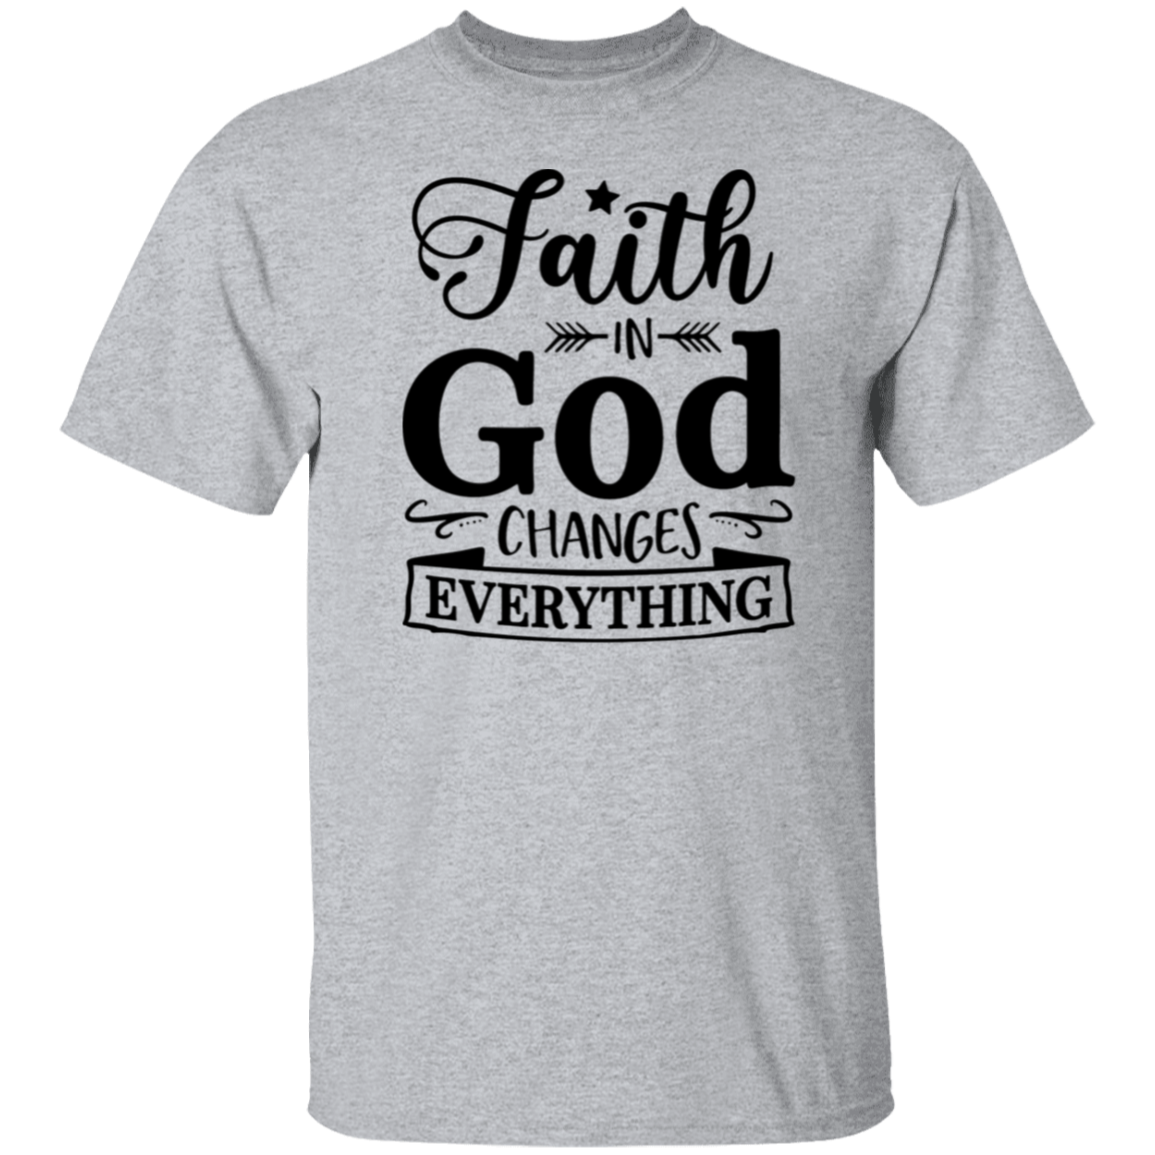 Faith in God Changes Everything T-Shirt